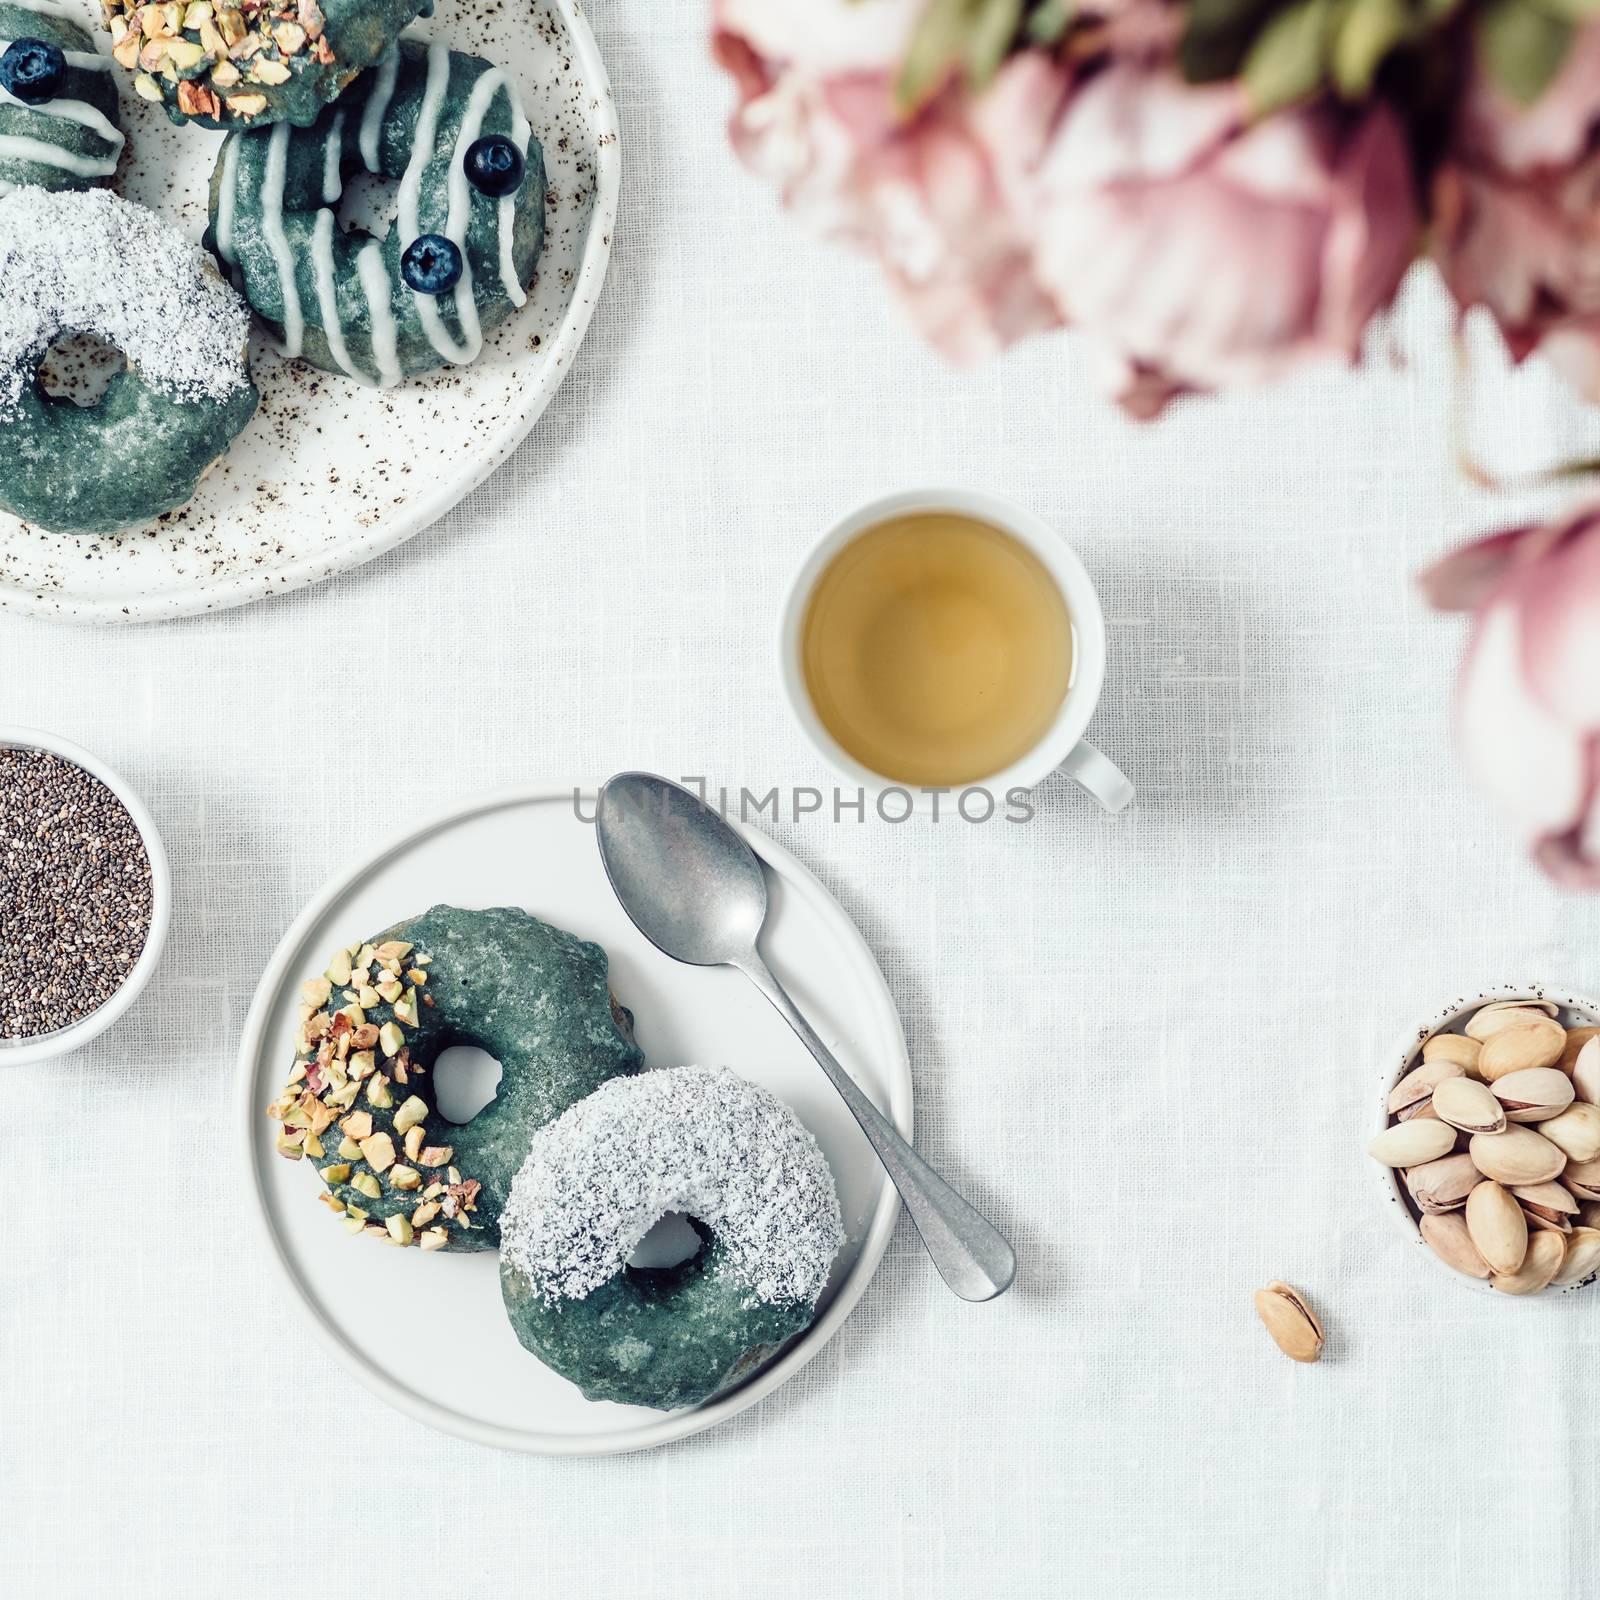 Vegan doughnuts with chia seeds topped with healthy spirulina glaze with pistachio, desiccated coconut and blueberry. Blue green spirulina donuts, herbal tea cup on table with white linen tablecloth.